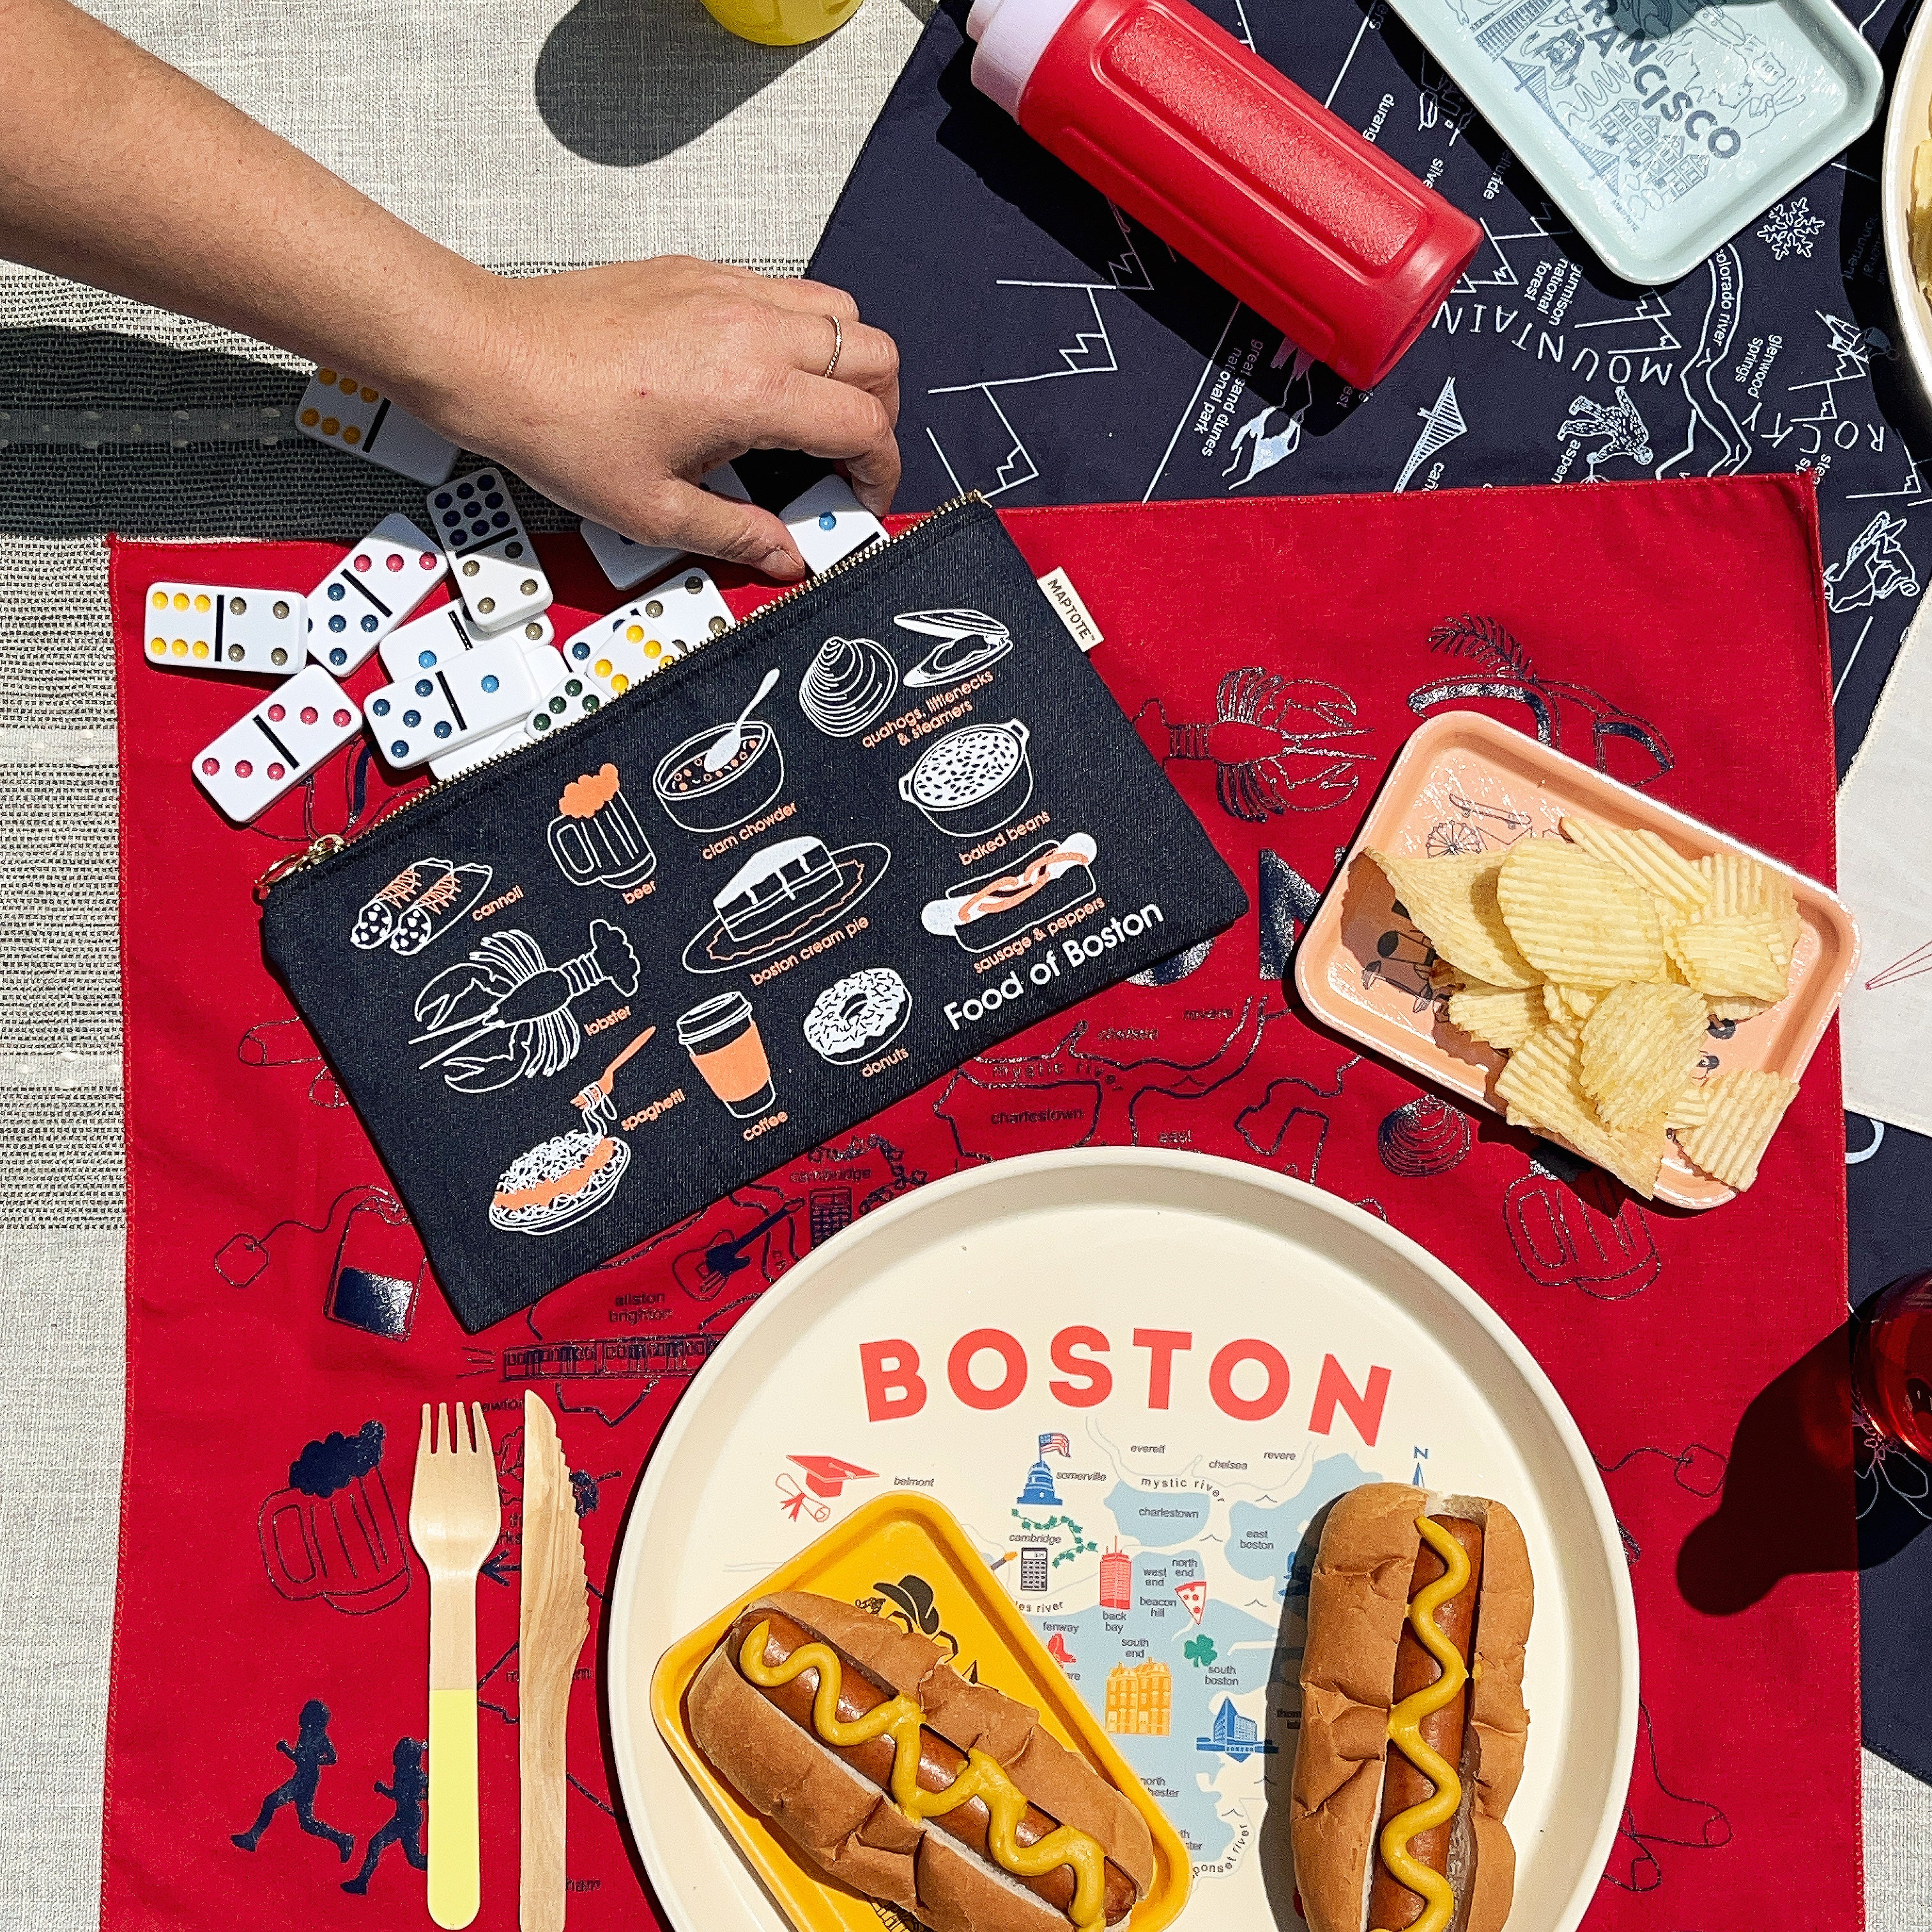 BBQ Guide: Memorial Day with Maptote! 🌭 ✨